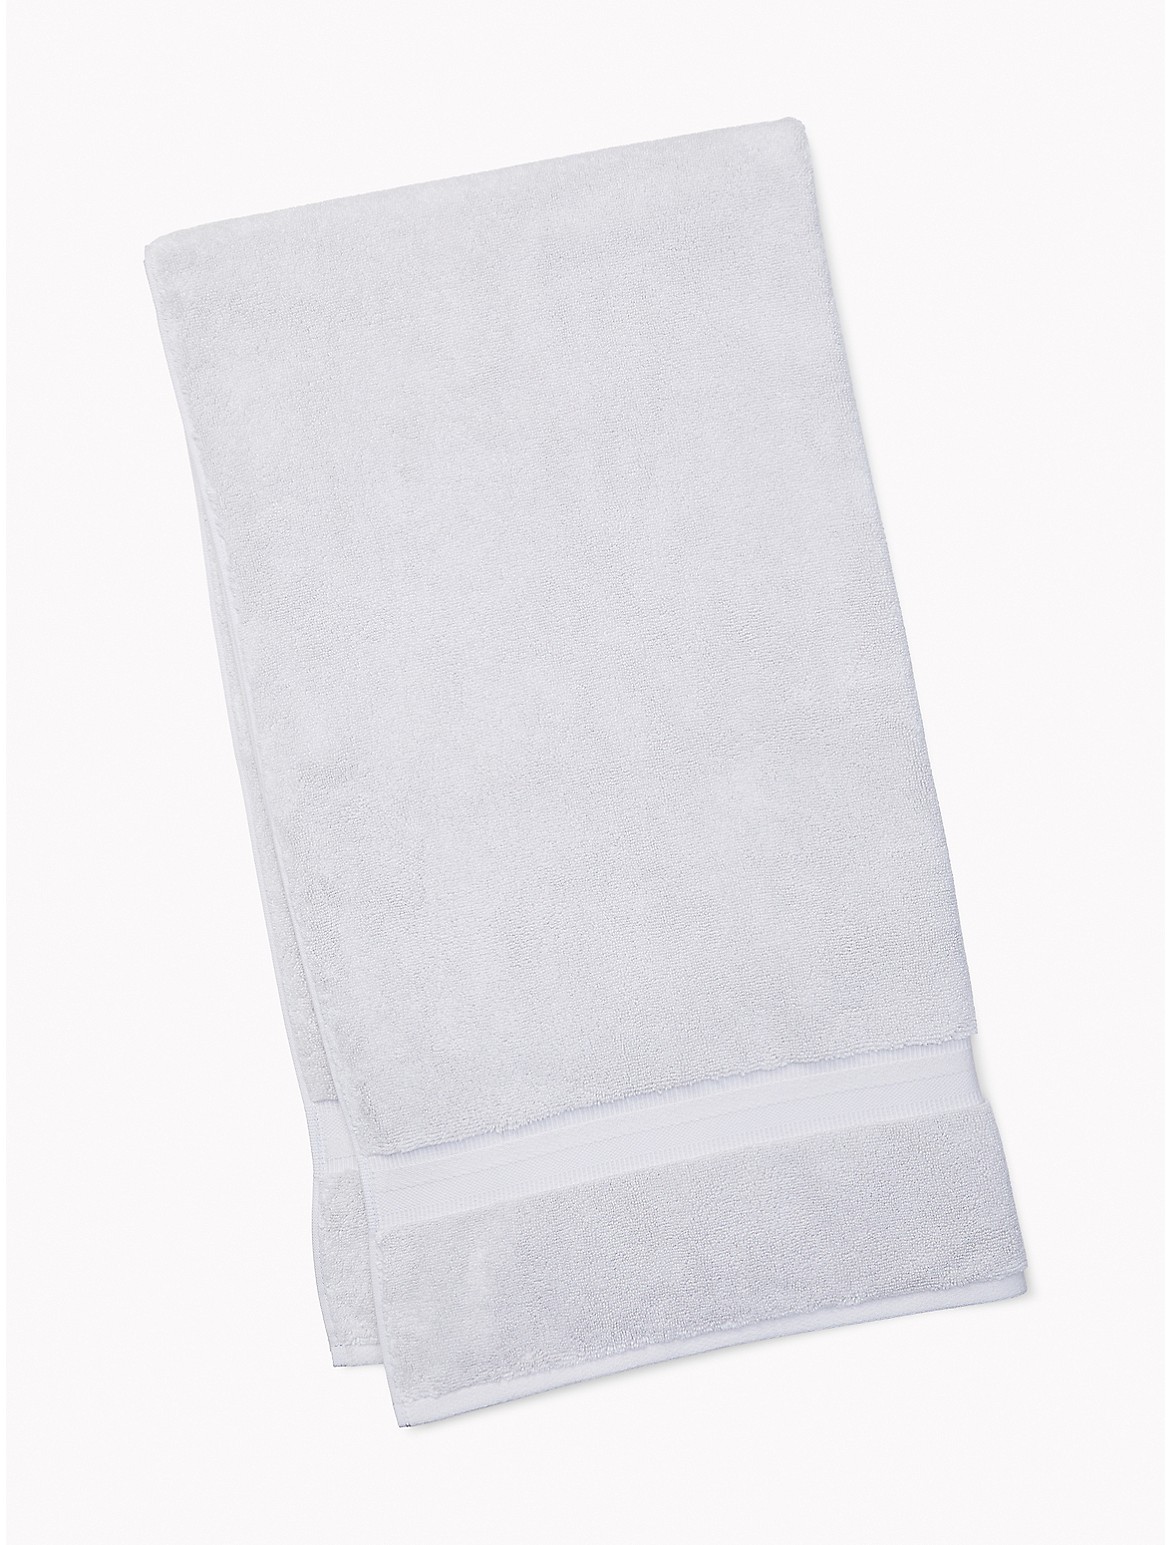 Tommy Hilfiger Signature Solid Bath Towel in Light Gray - Grey